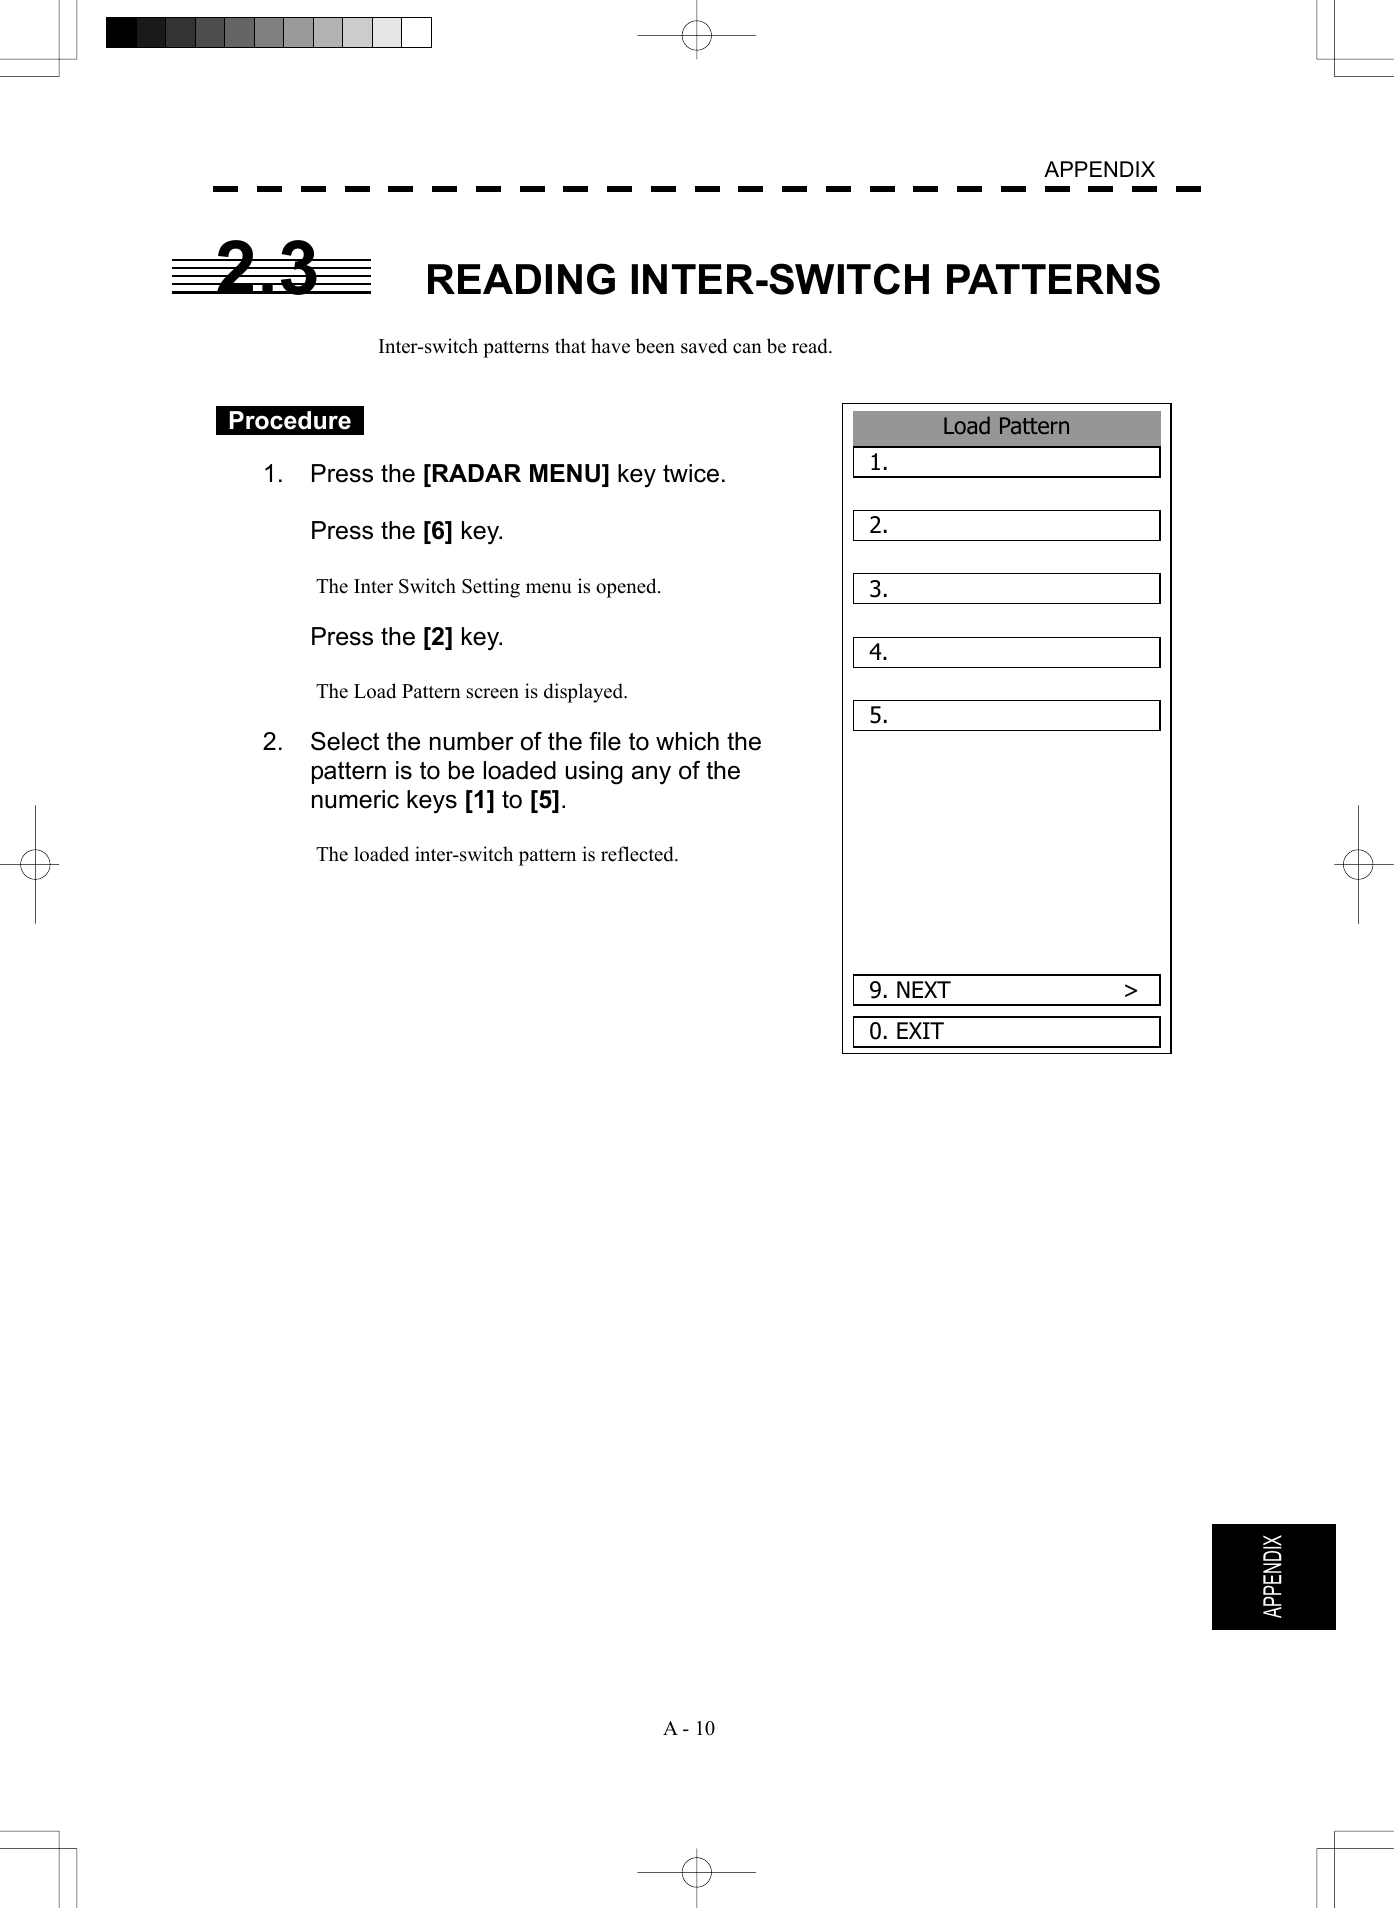   A - 10  APPENDIX  APPENDIX 2.3  READING INTER-SWITCH PATTERNS  Inter-switch patterns that have been saved can be read.    Procedure   1. Press the [RADAR MENU] key twice.   Press the [6] key.  The Inter Switch Setting menu is opened.   Press the [2] key.  The Load Pattern screen is displayed.  2.    Select the number of the file to which the pattern is to be loaded using any of the numeric keys [1] to [5].  The loaded inter-switch pattern is reflected.           Load Pattern1.  2.  3.  4.  5.  0. EXIT 9. NEXT               &gt;